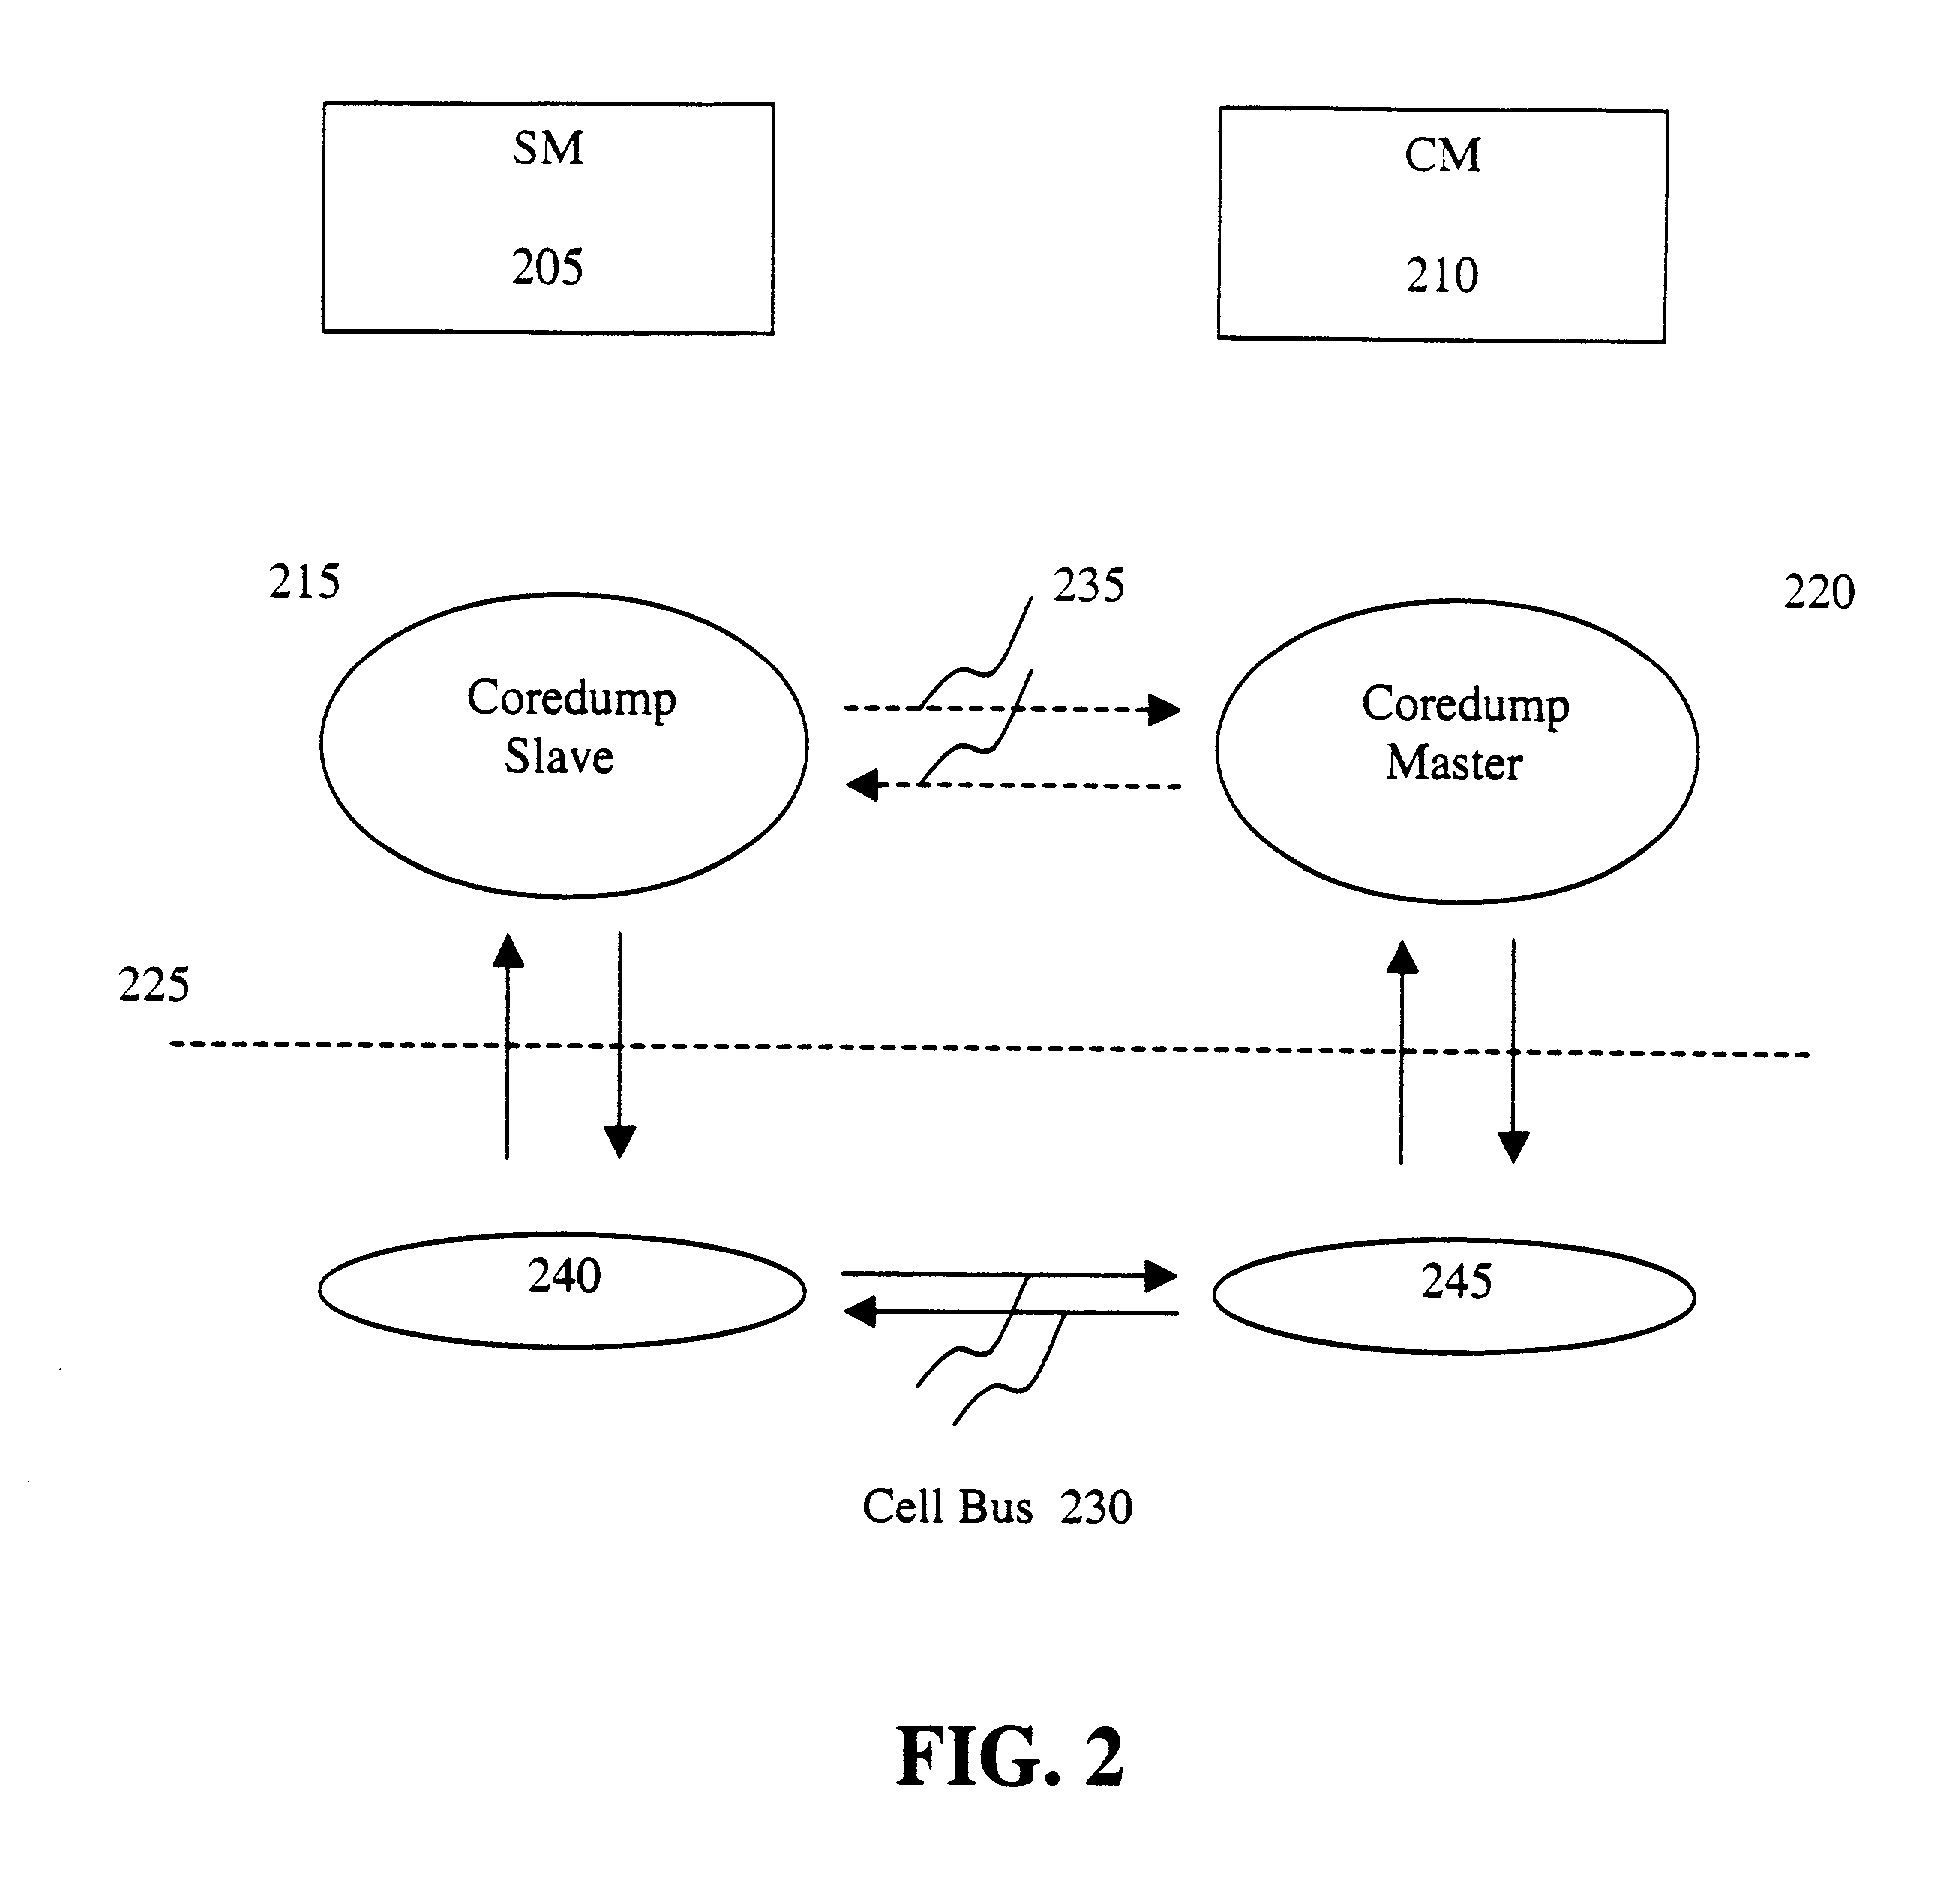 Method for capturing core dump of a service module